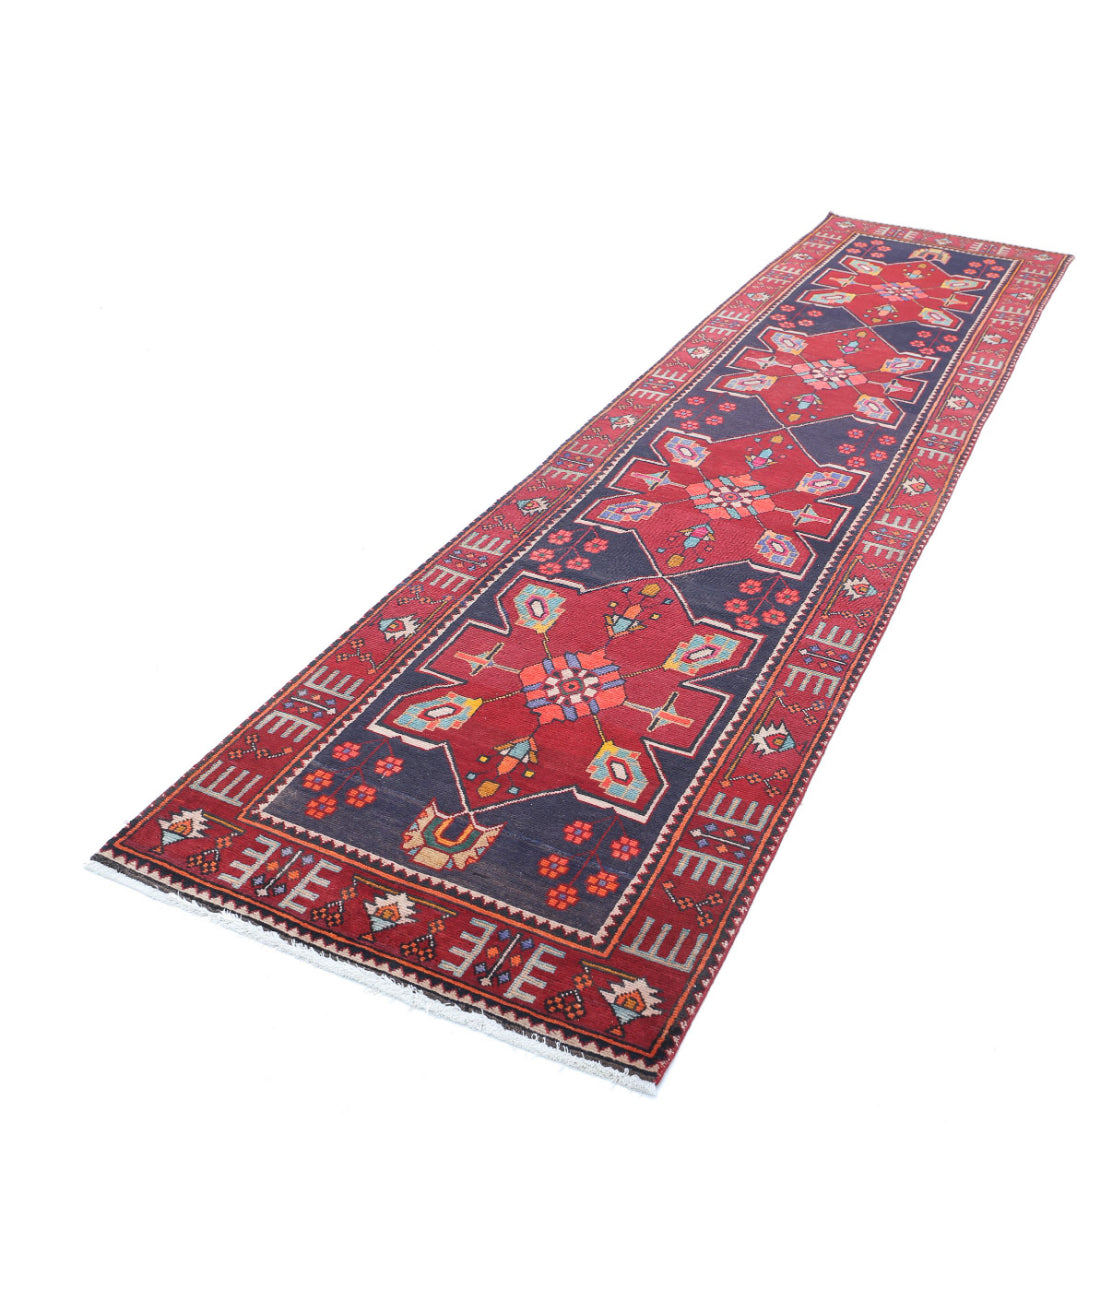 Hand Knotted Persian Hamadan Wool Rug - 3'3'' x 13'1'' 3'3'' x 13'1'' (98 X 393) / Black / Red